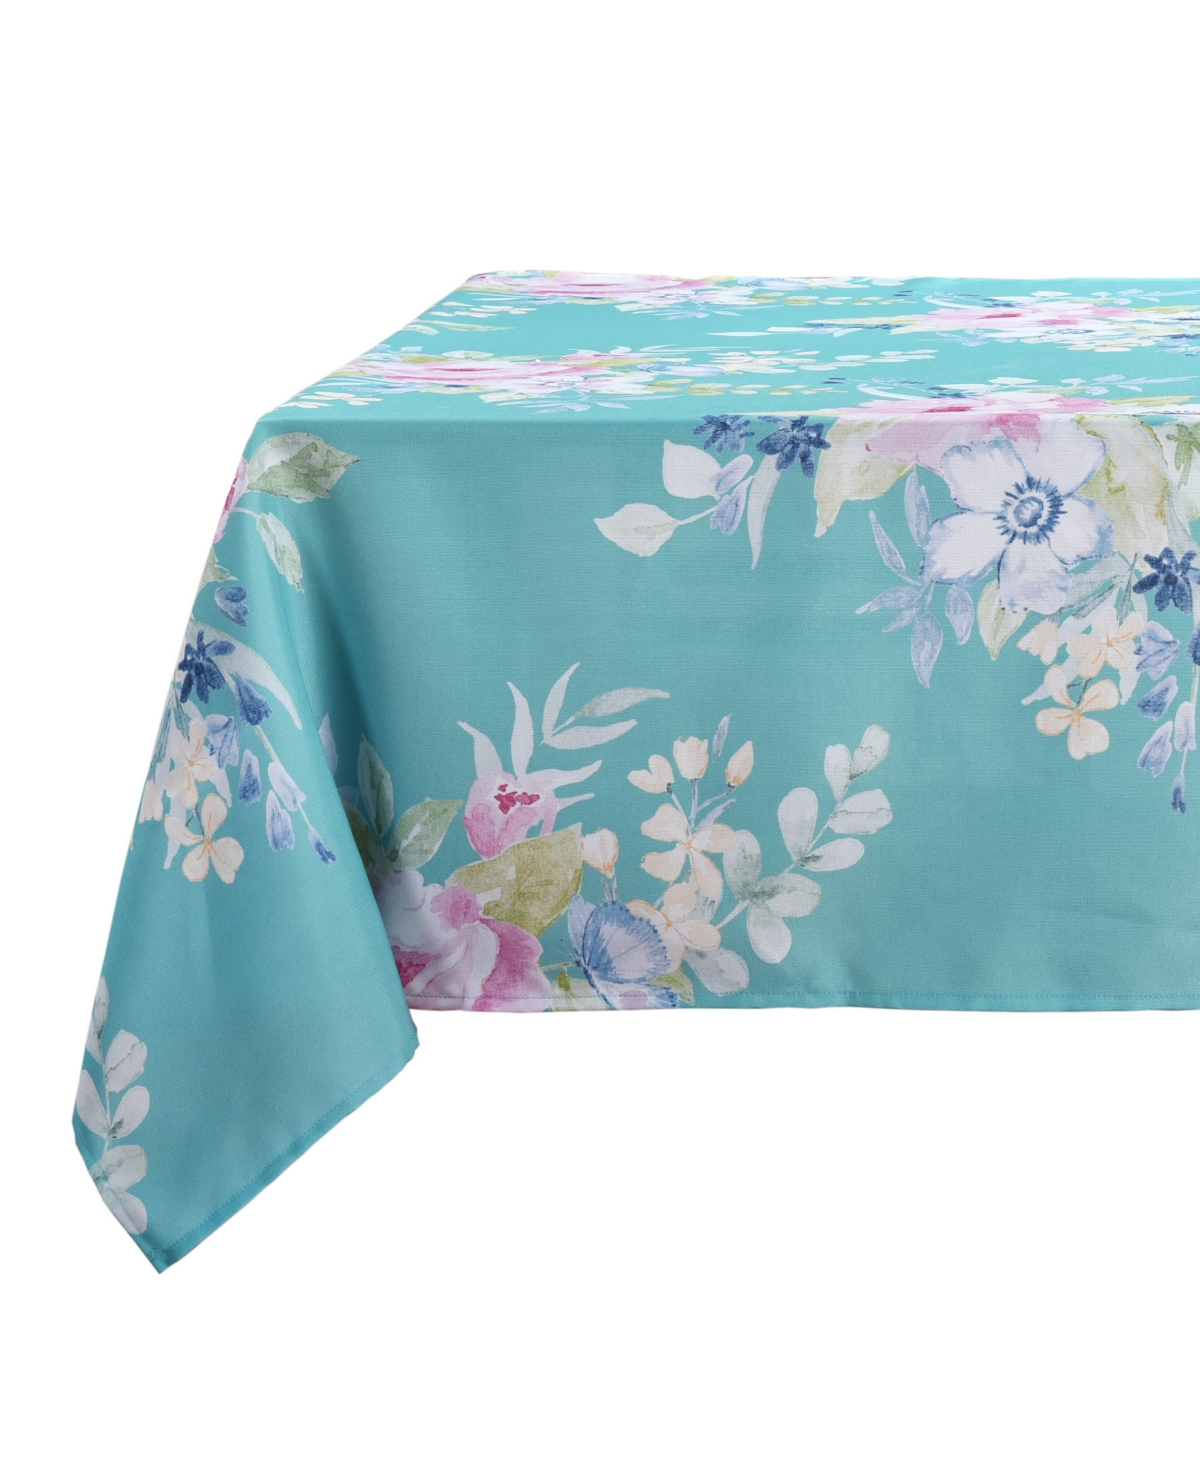 J Queen New York Esme Tablecloth 60 X 120 In Turquoise